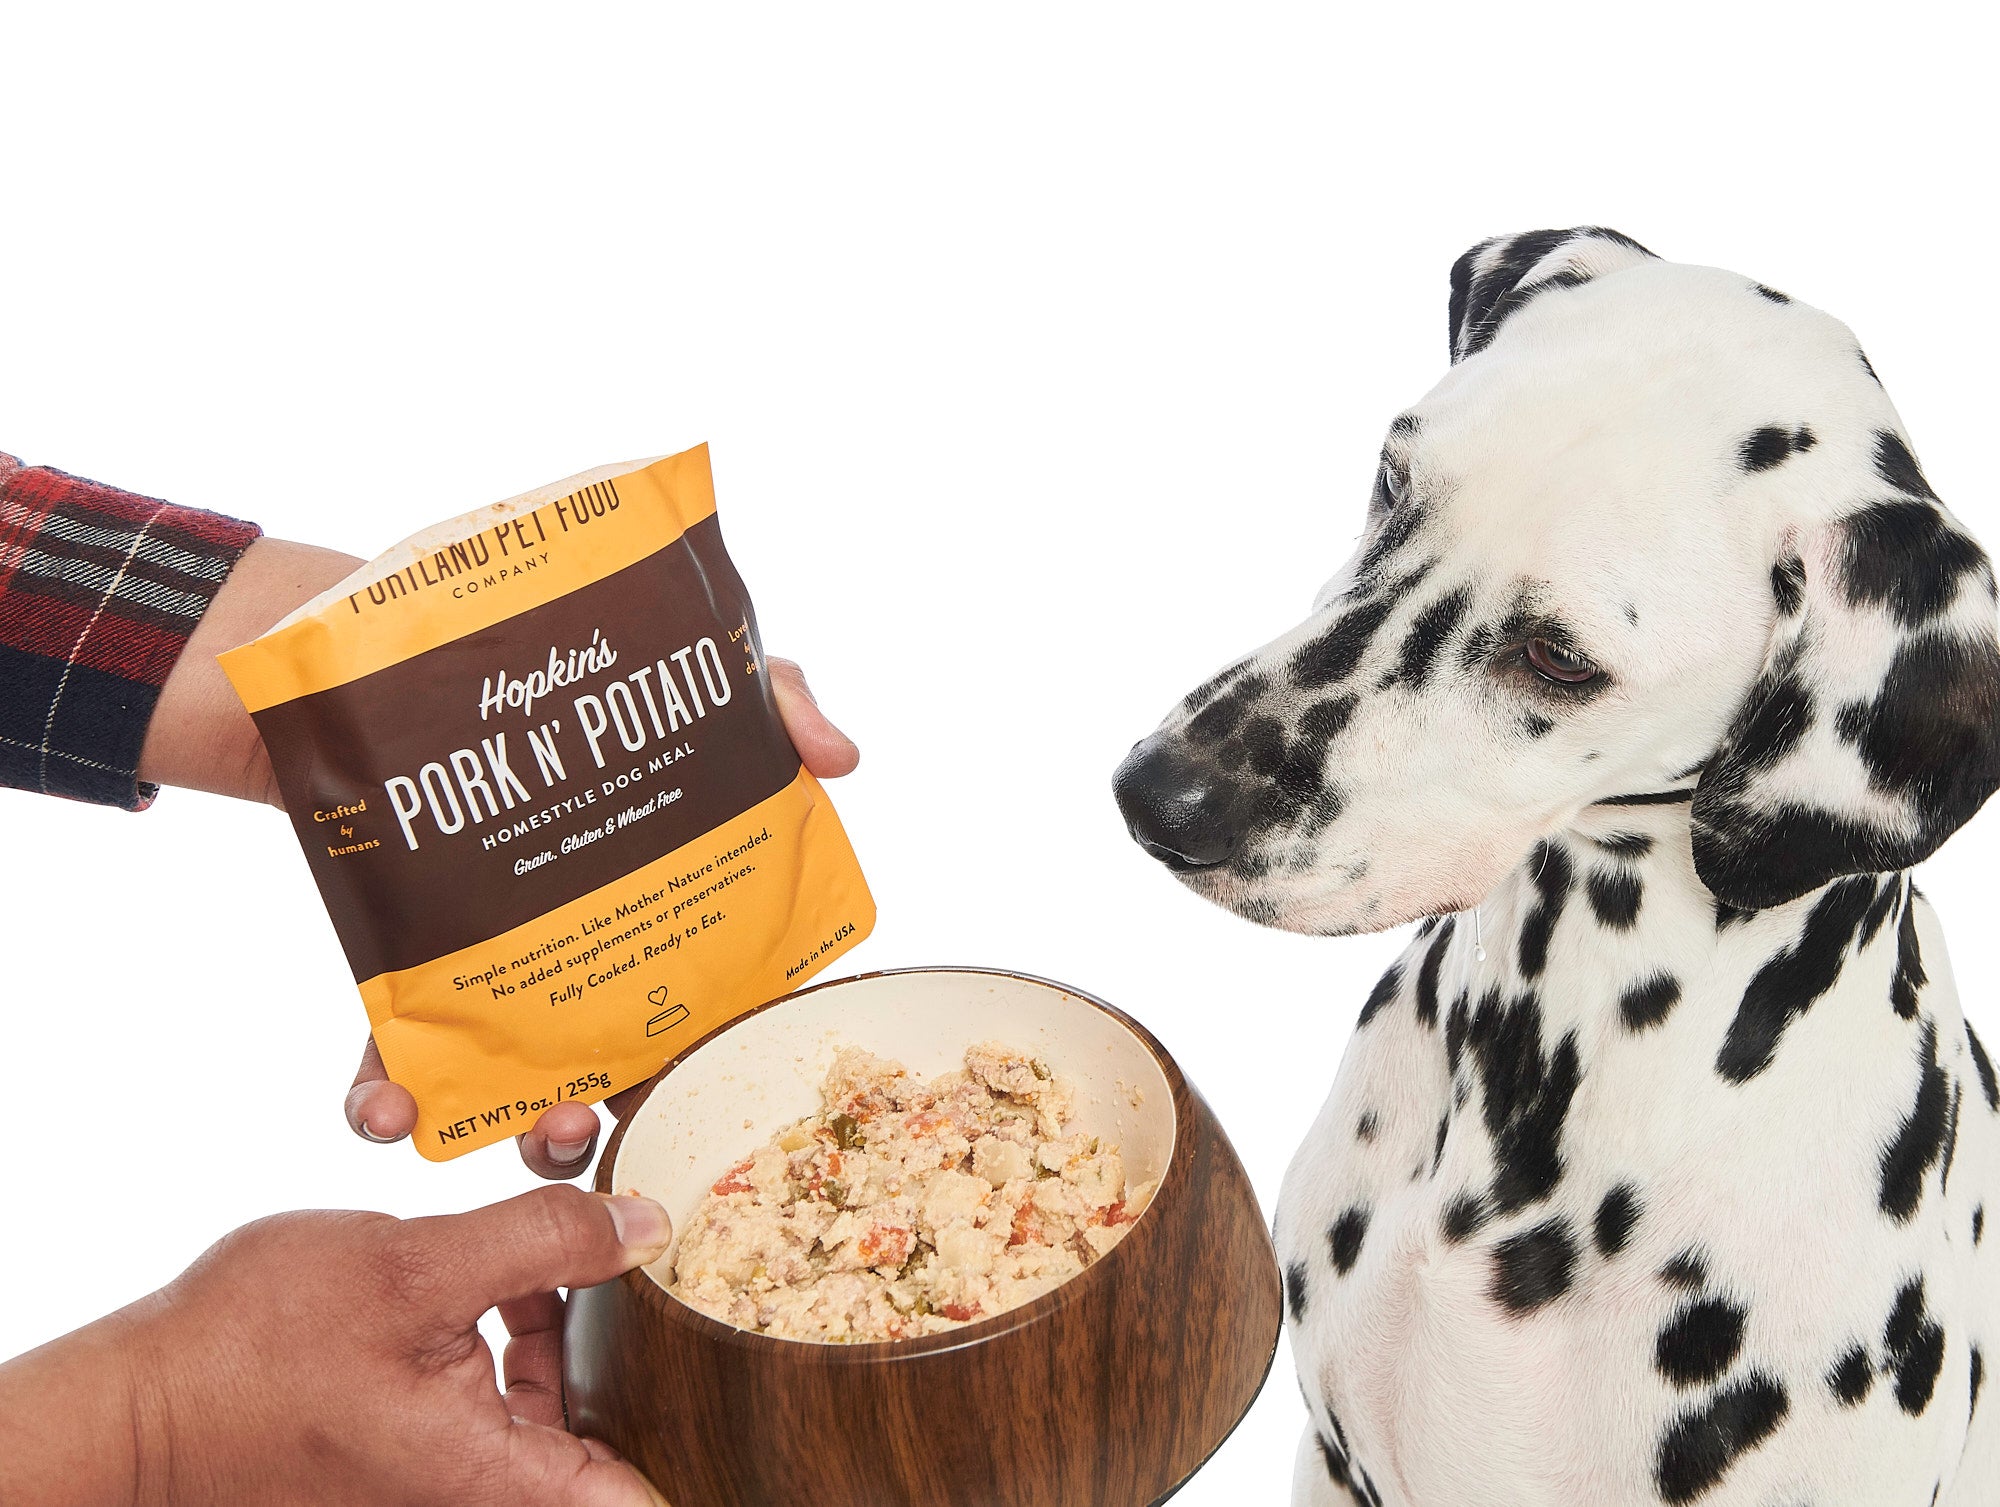 Benefits Of A Gluten-Free Diet For Dogs